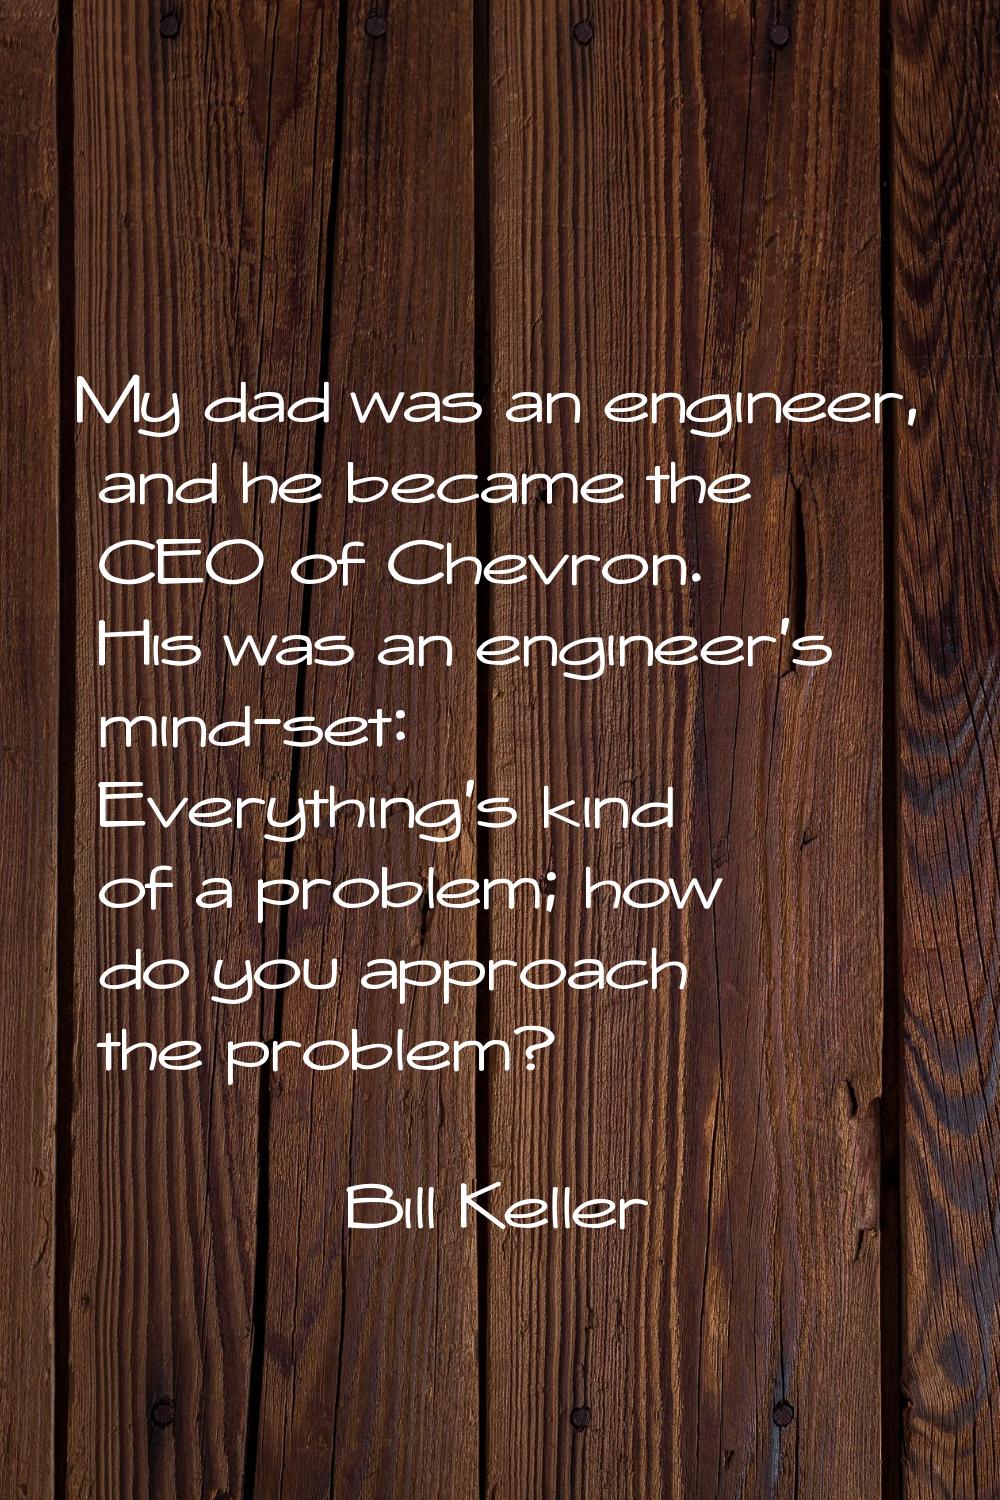 My dad was an engineer, and he became the CEO of Chevron. His was an engineer's mind-set: Everythin